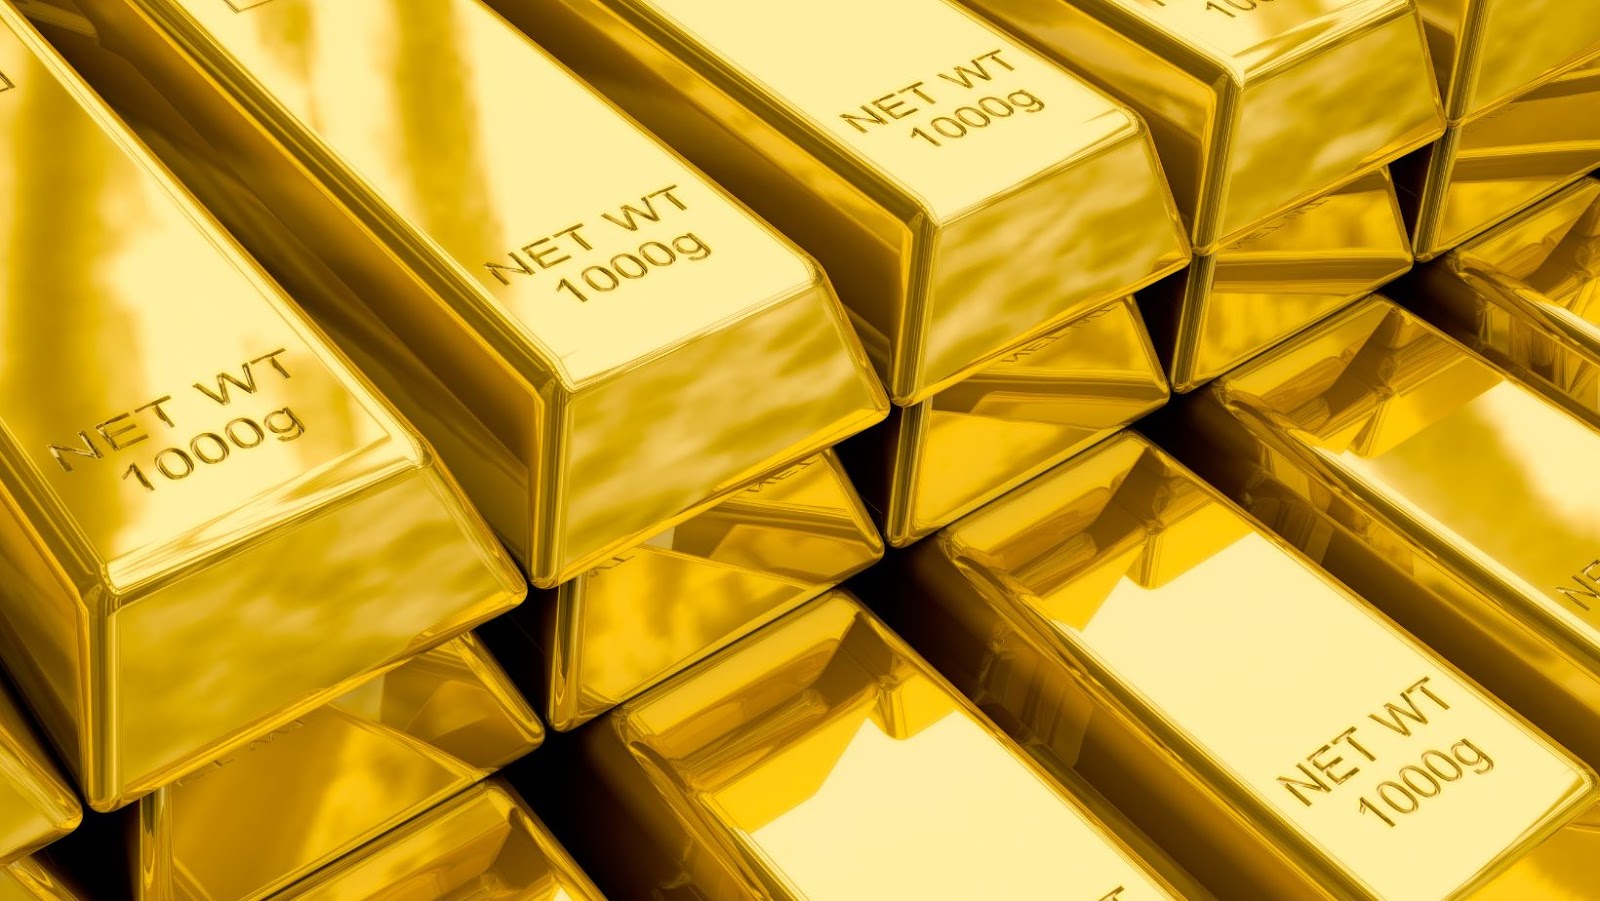 5 Reasons why Gold Bars Are a Good Investment - Better This World